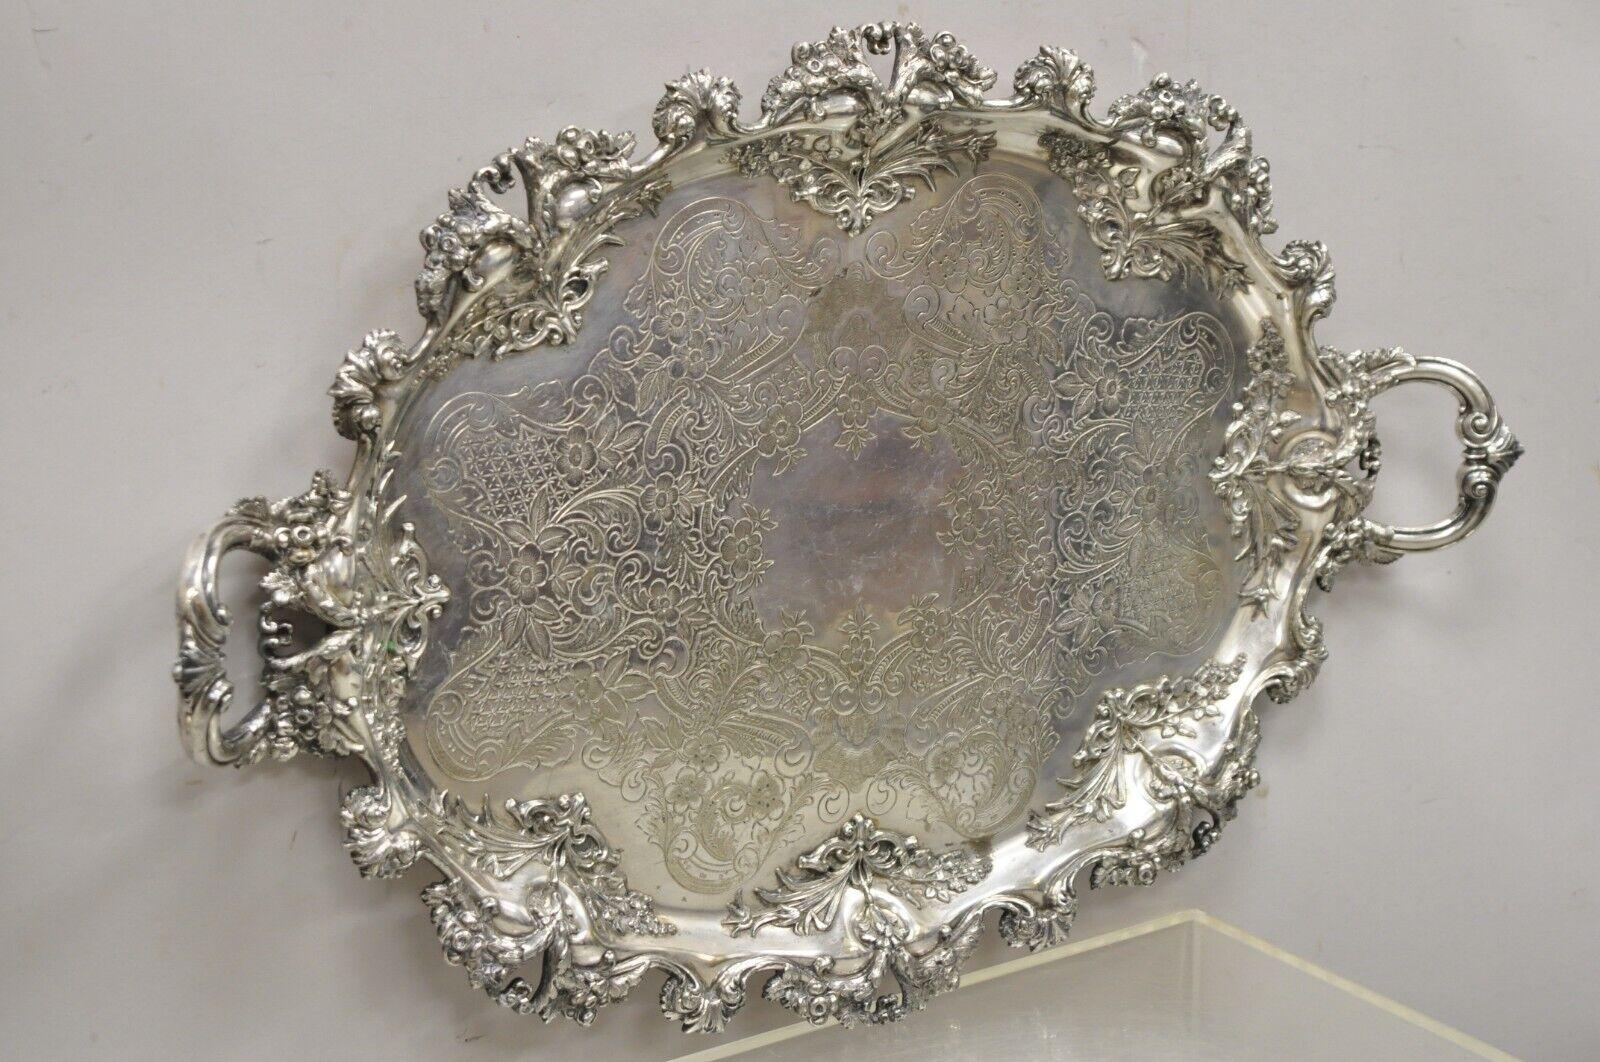 Barbour Co BSCEP antique Victorian ornate silver plate repousse oval platter tray. Item features extremely ornate leafy scrollwork, fine repousse work, raised twin handles, etched scrollwork to center, multiple marks to underside including 